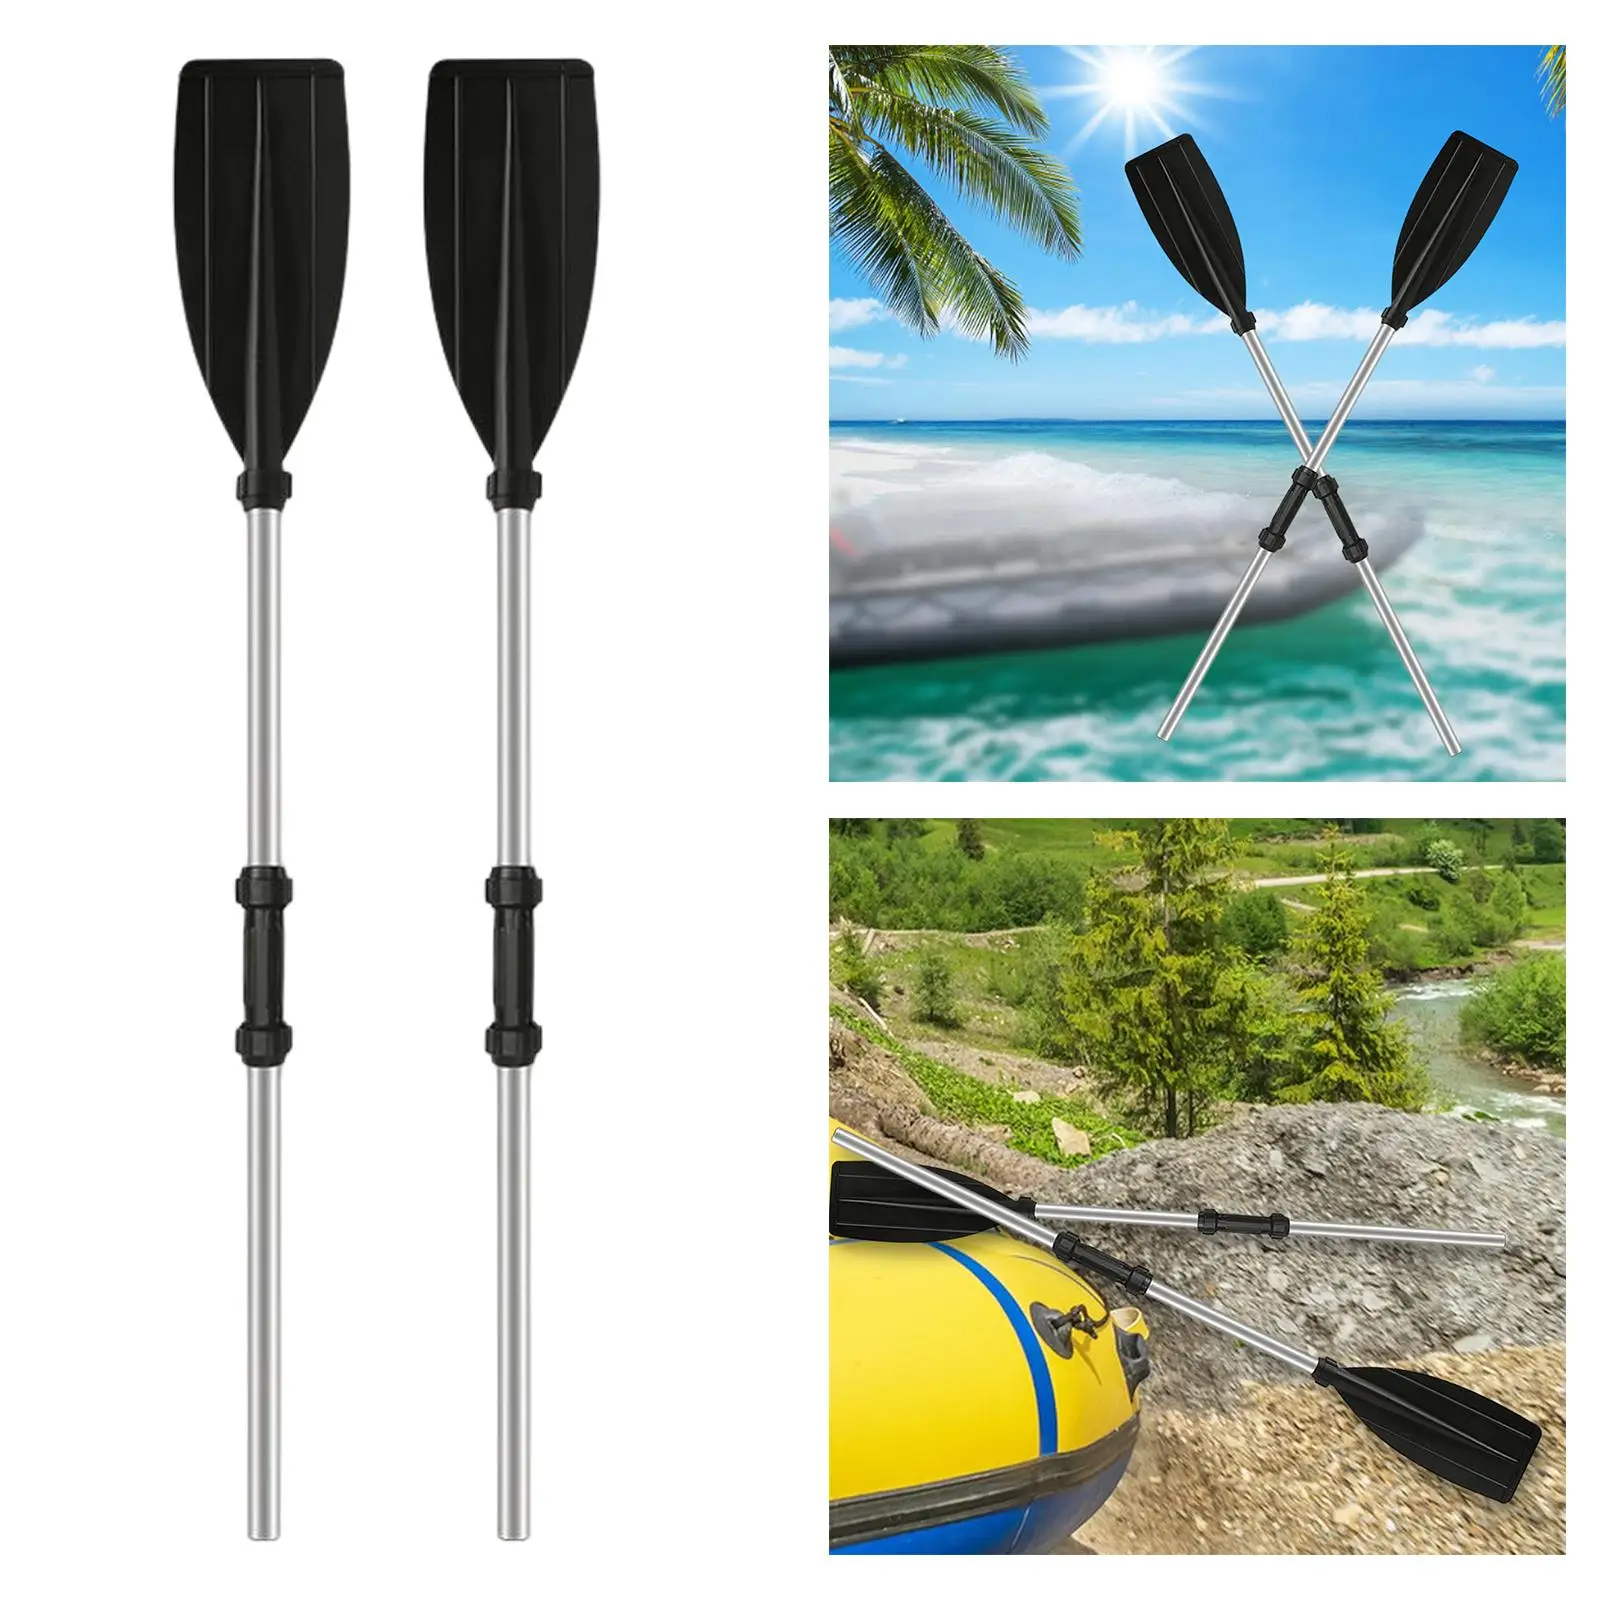 Portable Kayak Boat Rafting Paddle Aluminium Alloy Lightweight Stand up Paddle Board for Surfing Kayak Boating Rafting Supplies